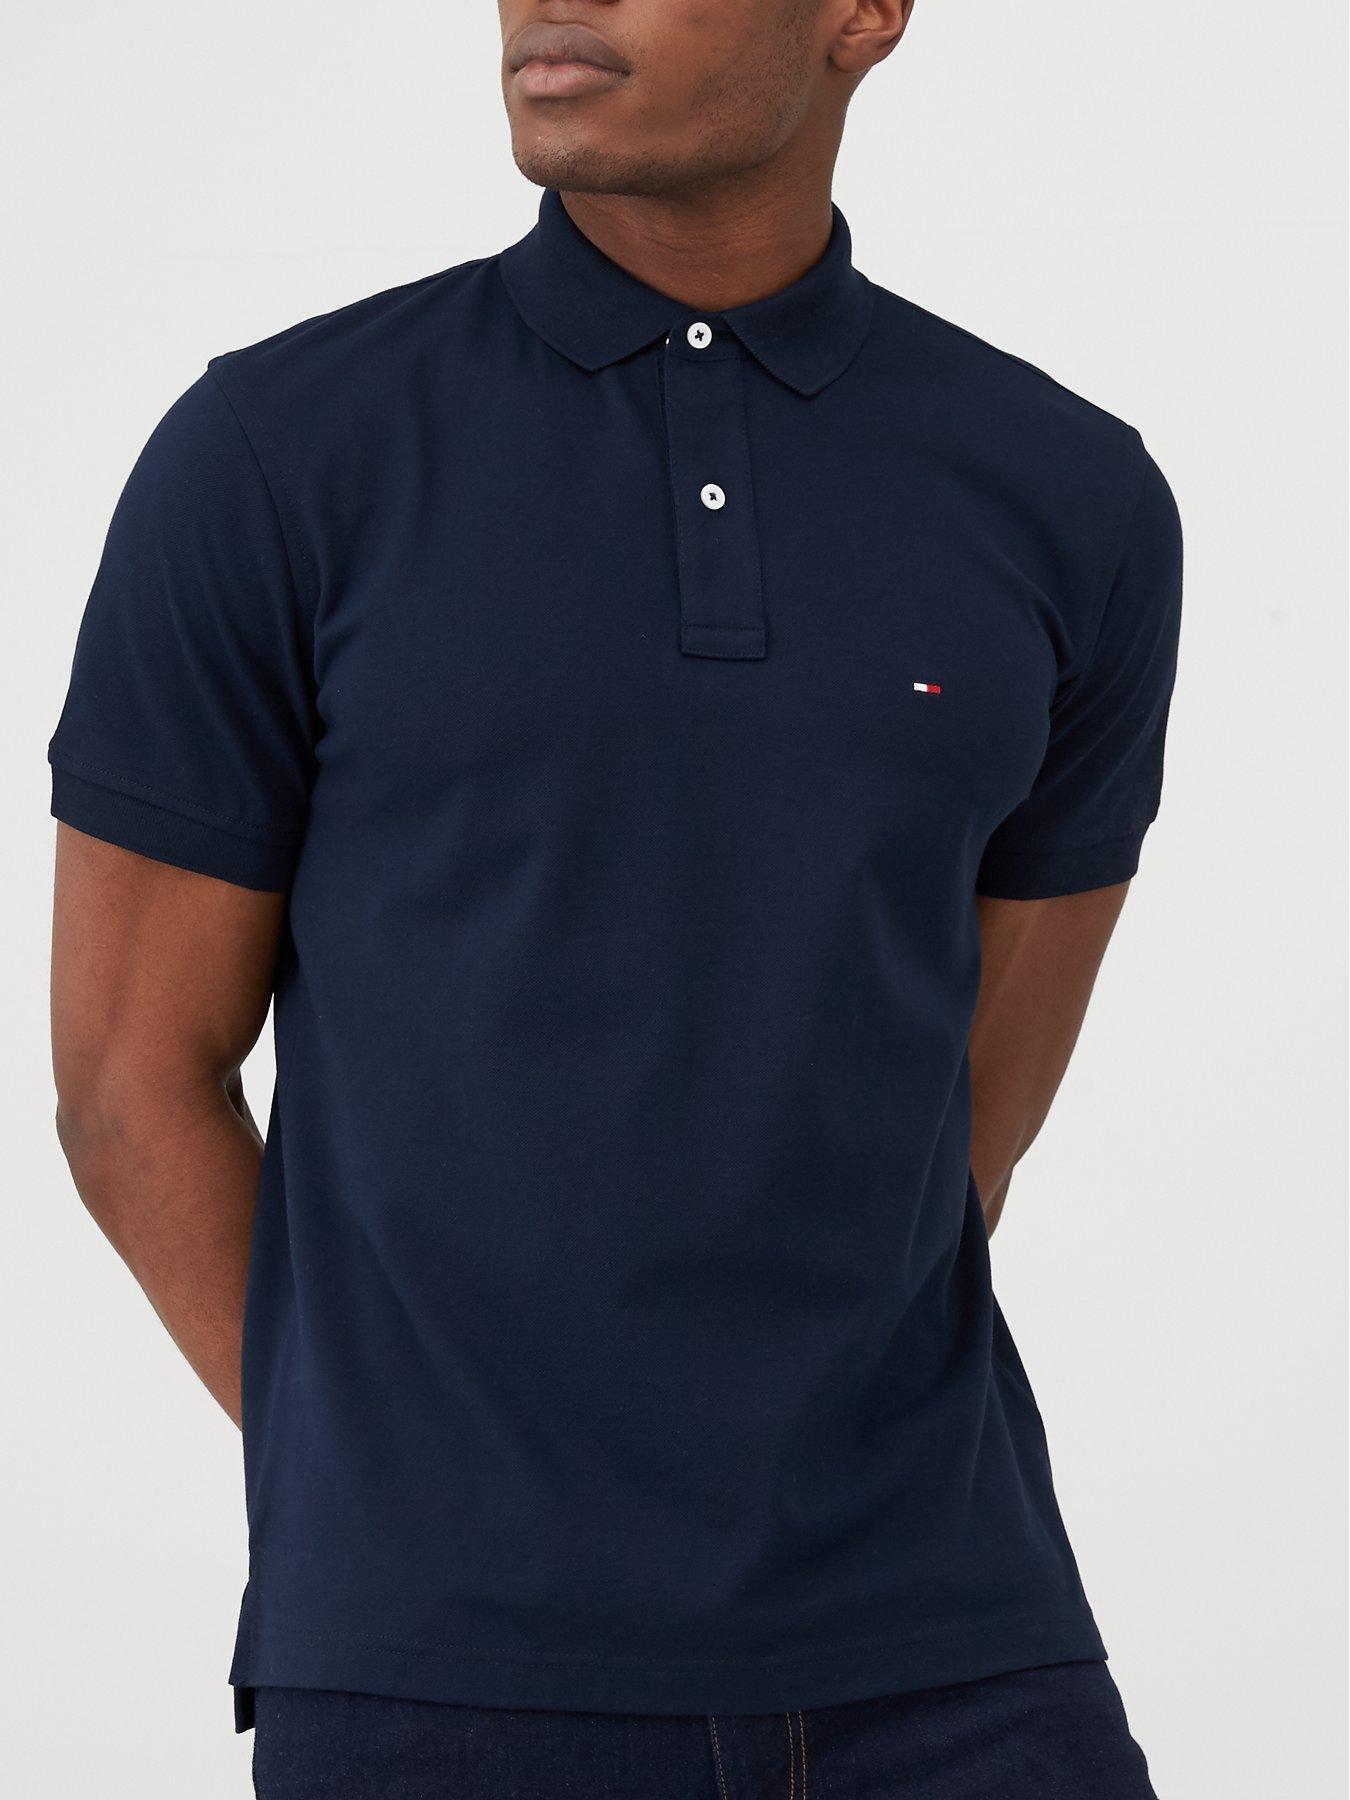 tommy hilfiger navy polo shirt